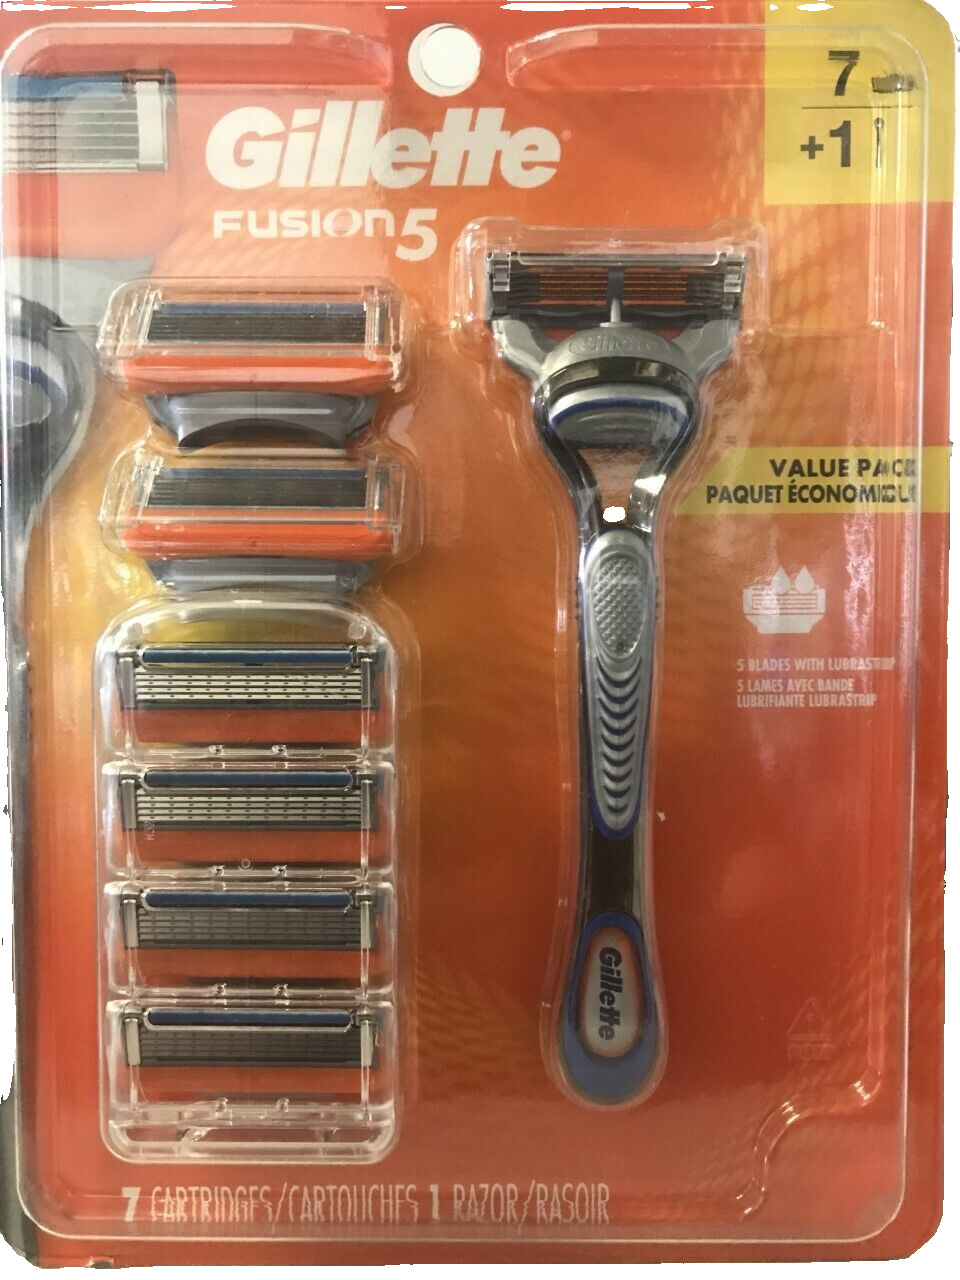 Gillette Fusion 5 Value Pack of 7 Refill Cartridges + 1 Razor Handle New Sealed